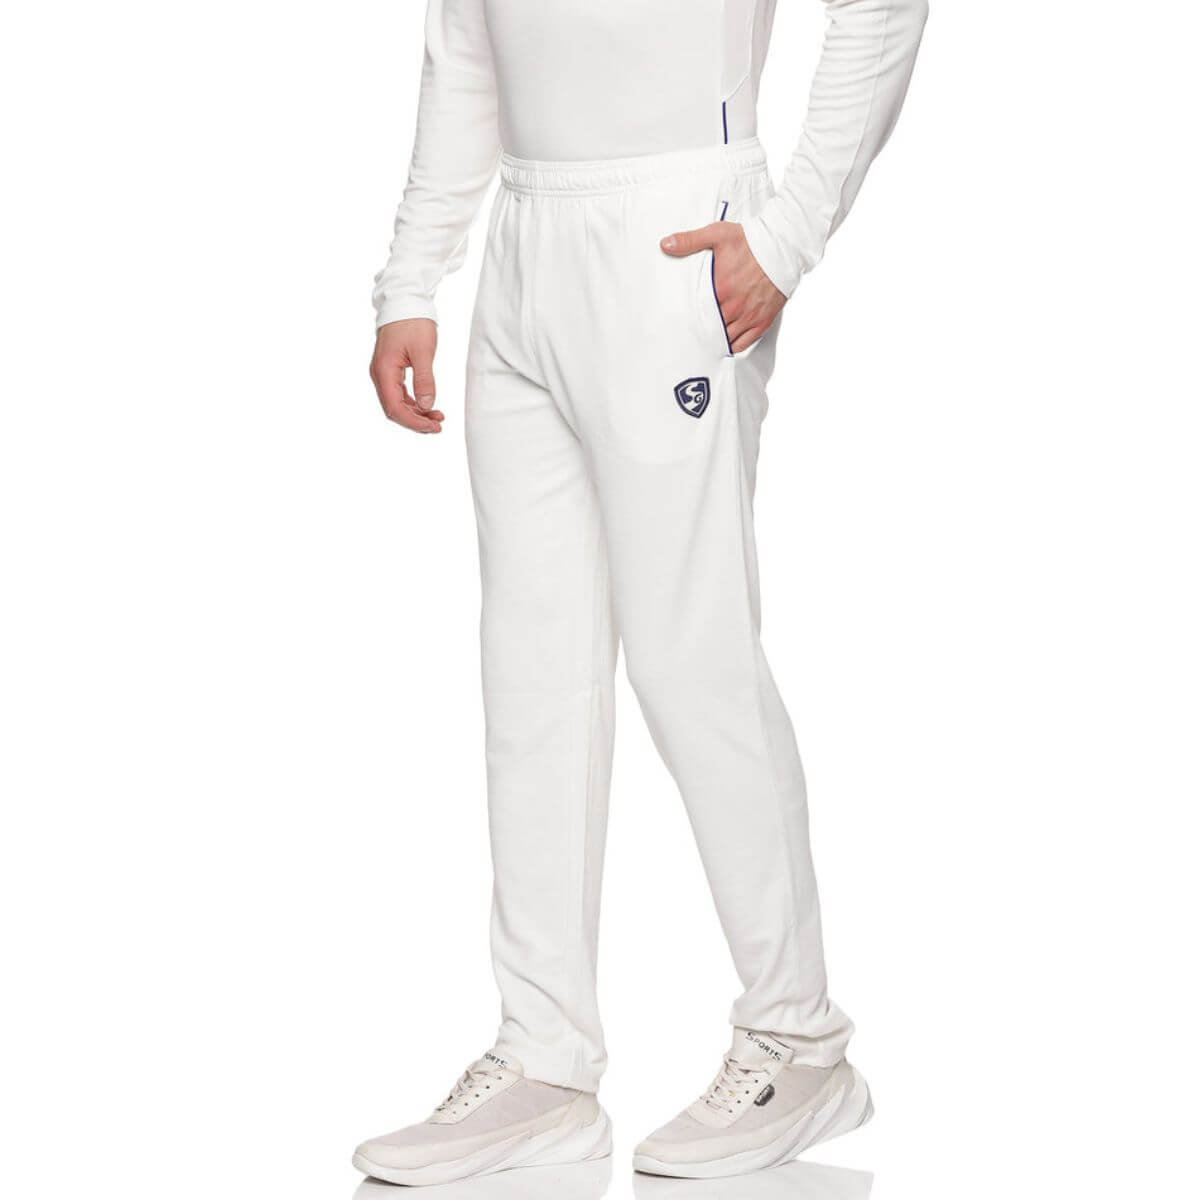 DSC Atmos Polyester Cricket Pant Size 32 (White/Navy) : Amazon.in: Clothing  & Accessories